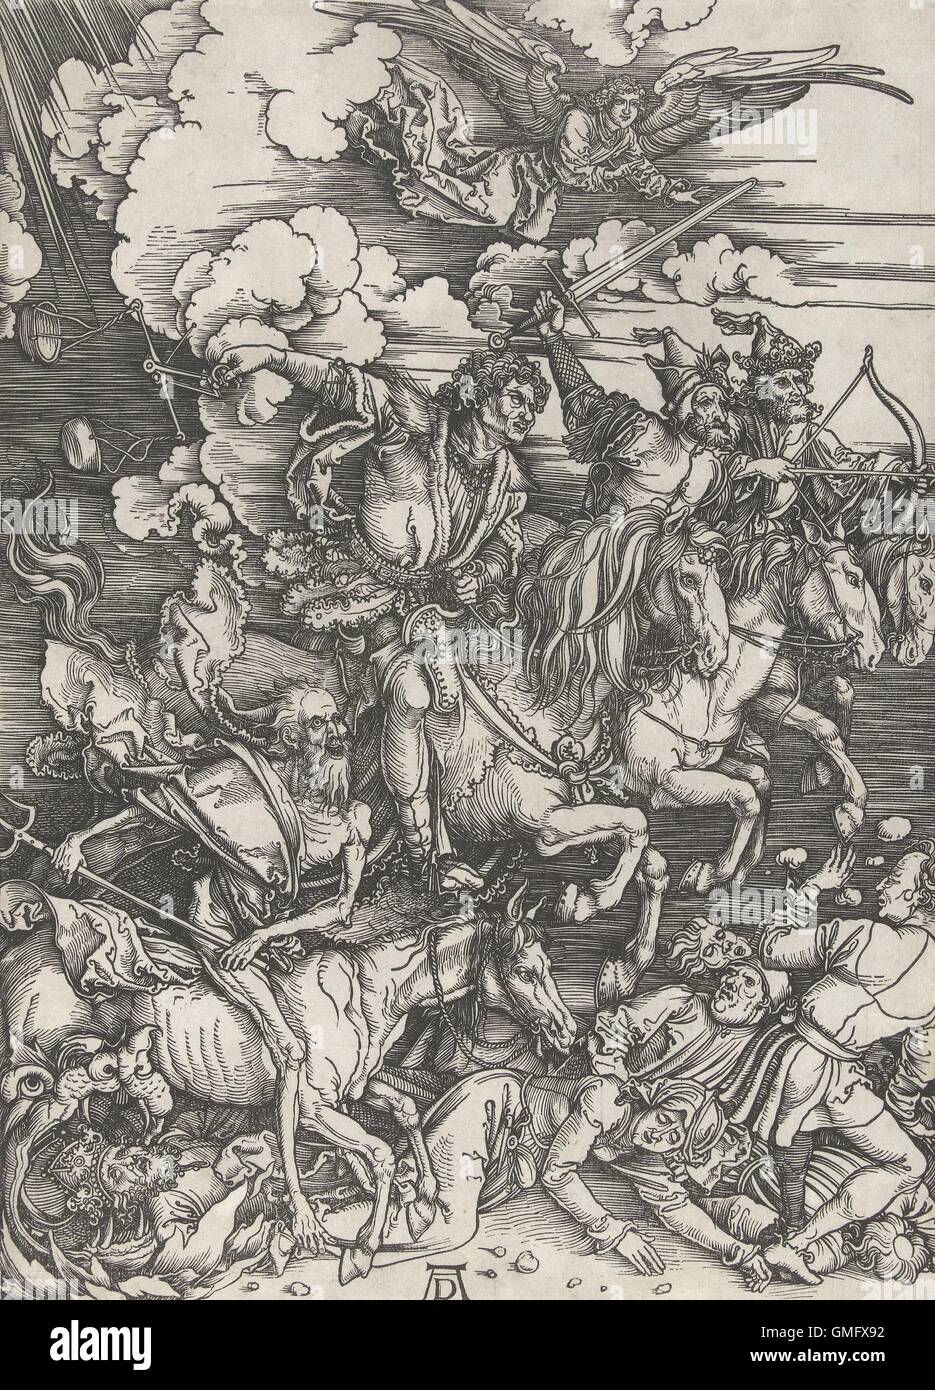 Four Horsemen of the Apocalypse, by Albrecht Durer, 1497-98, German print, wood engraving. Four men on horses armed with a bow and arrow, a sword, balance scales, and a pitchfork, trampling people (BSLOC 2016 2 180) Stock Photo